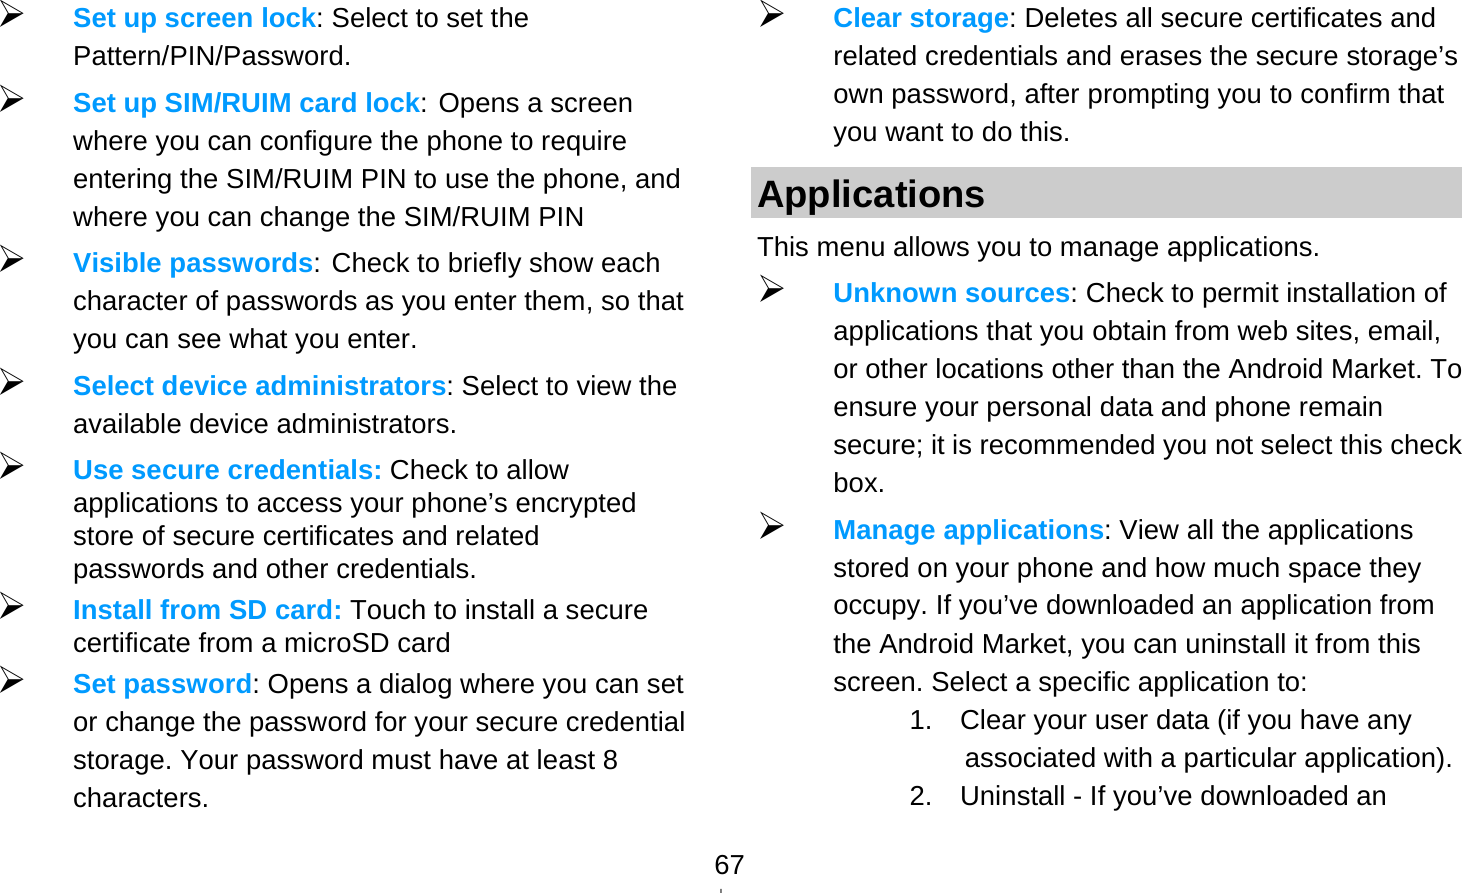   67 Set up screen lock: Select to set the Pattern/PIN/Password.  Set up SIM/RUIM card lock: Opens a screen where you can configure the phone to require entering the SIM/RUIM PIN to use the phone, and where you can change the SIM/RUIM PIN  Visible passwords: Check to briefly show each character of passwords as you enter them, so that you can see what you enter.  Select device administrators: Select to view the available device administrators.  Use secure credentials: Check to allow applications to access your phone’s encrypted store of secure certificates and related passwords and other credentials.    Install from SD card: Touch to install a secure certificate from a microSD card  Set password: Opens a dialog where you can set or change the password for your secure credential storage. Your password must have at least 8 characters.  Clear storage: Deletes all secure certificates and related credentials and erases the secure storage’s own password, after prompting you to confirm that you want to do this. Applications This menu allows you to manage applications.  Unknown sources: Check to permit installation of applications that you obtain from web sites, email, or other locations other than the Android Market. To ensure your personal data and phone remain secure; it is recommended you not select this check box.  Manage applications: View all the applications stored on your phone and how much space they occupy. If you’ve downloaded an application from the Android Market, you can uninstall it from this screen. Select a specific application to: 1.    Clear your user data (if you have any associated with a particular application). 2.    Uninstall - If you’ve downloaded an 